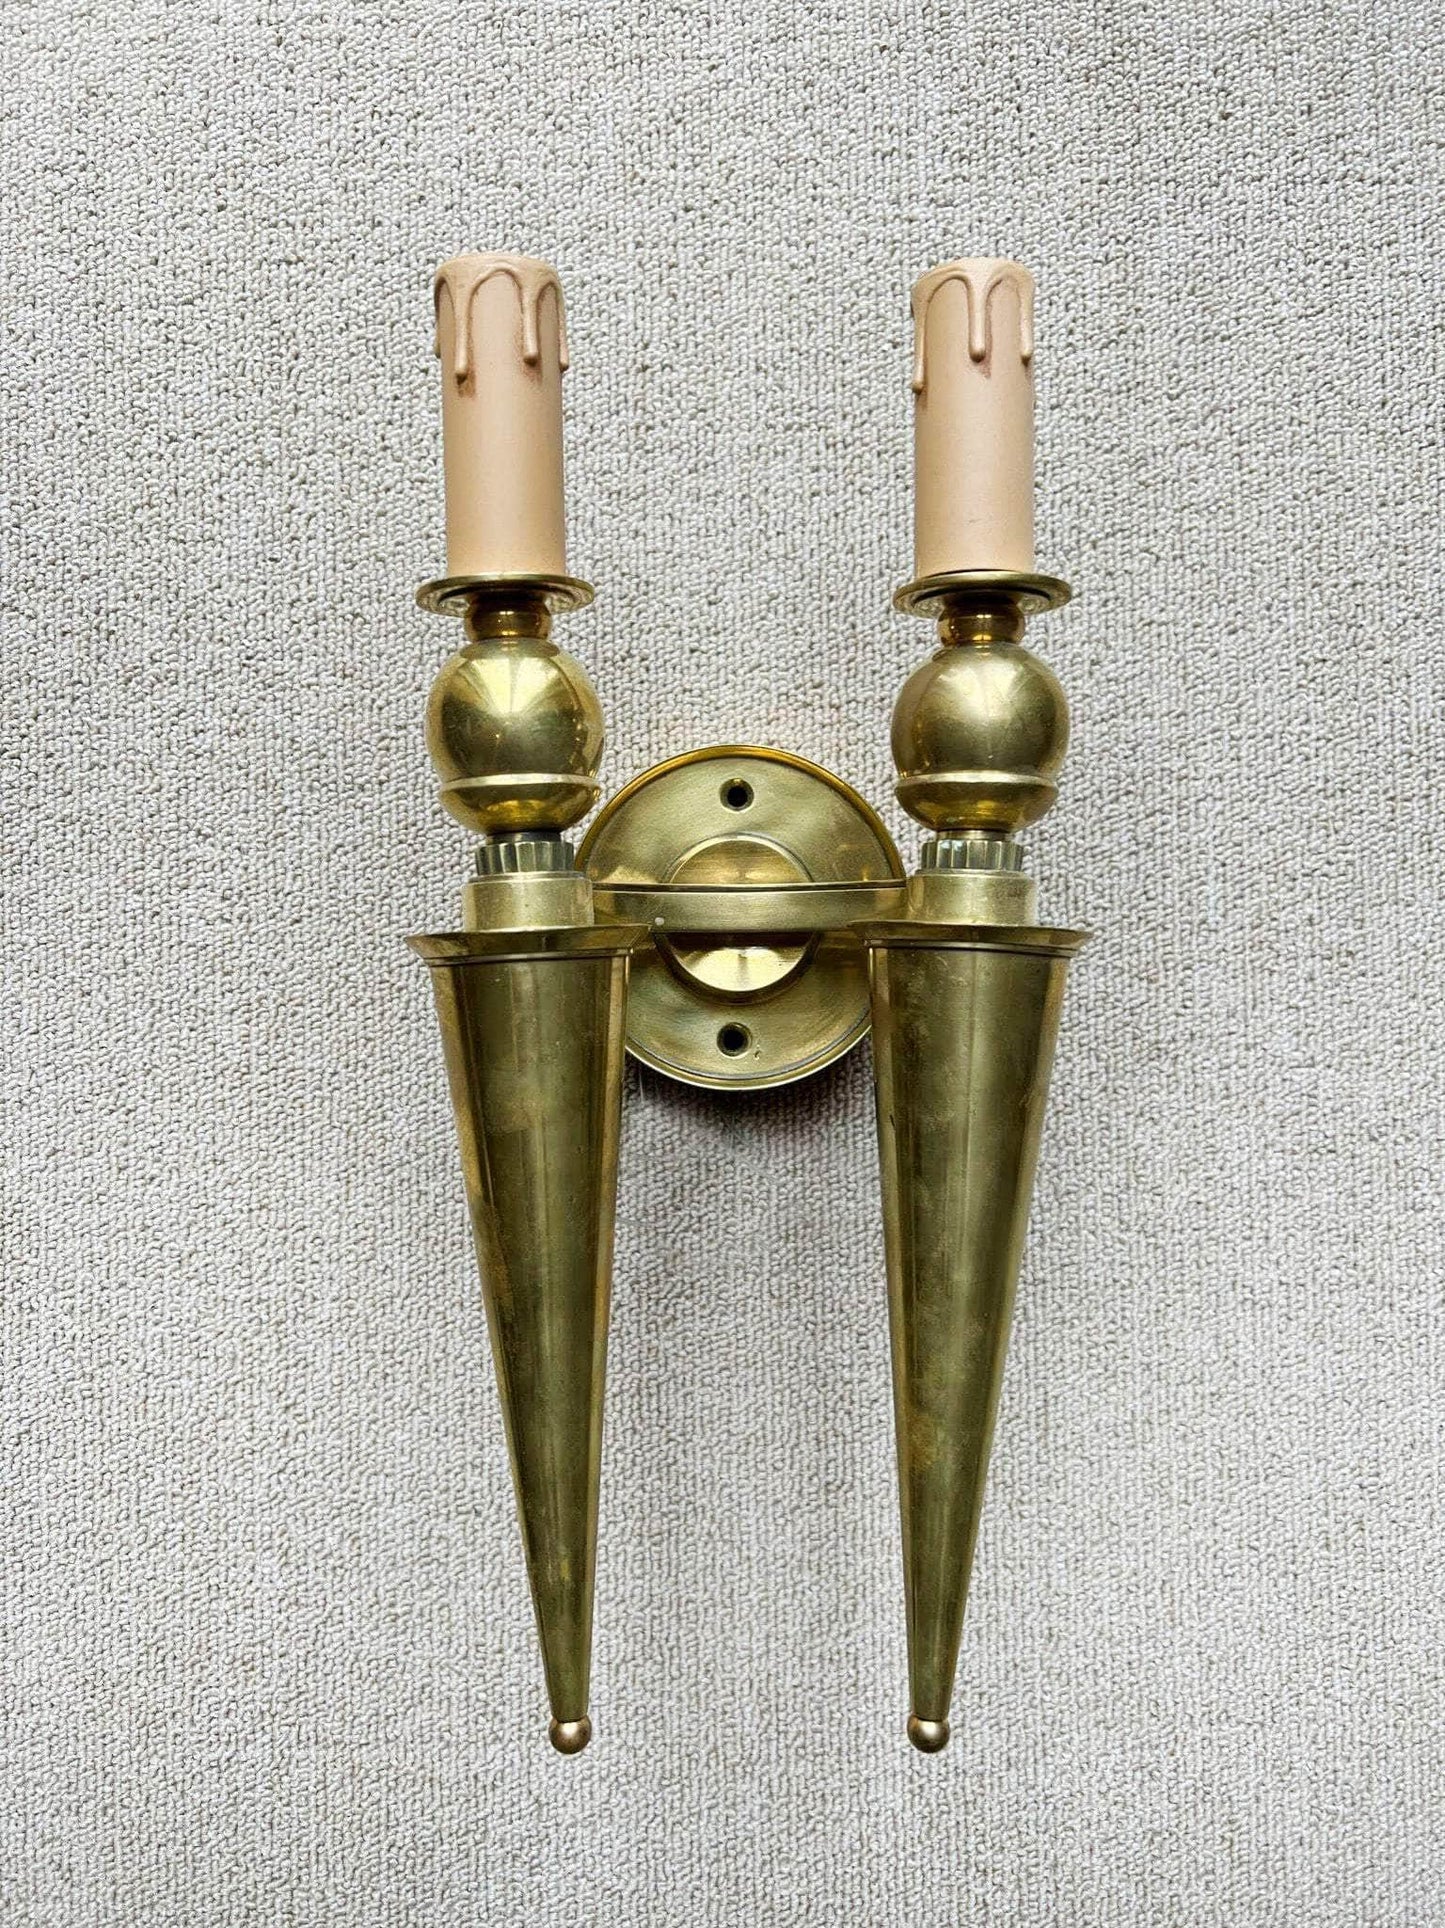 Pair of Art Deco French Brass Wall Sconces